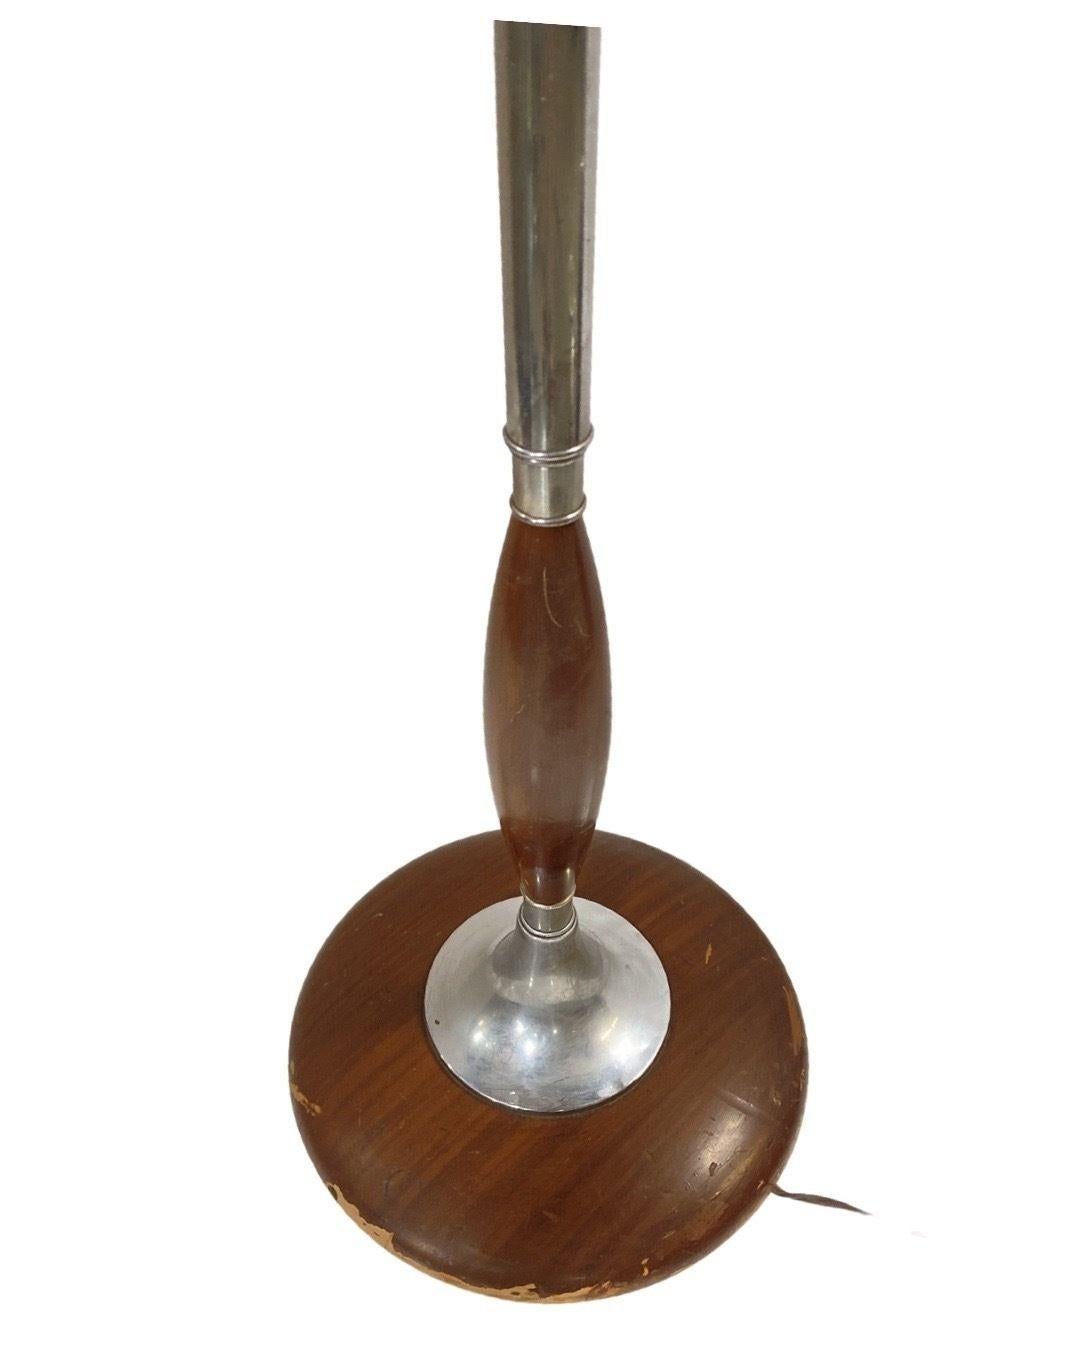 Art Moderne Wood and Chrome Swing Arm Floor Lamp In Excellent Condition For Sale In Van Nuys, CA